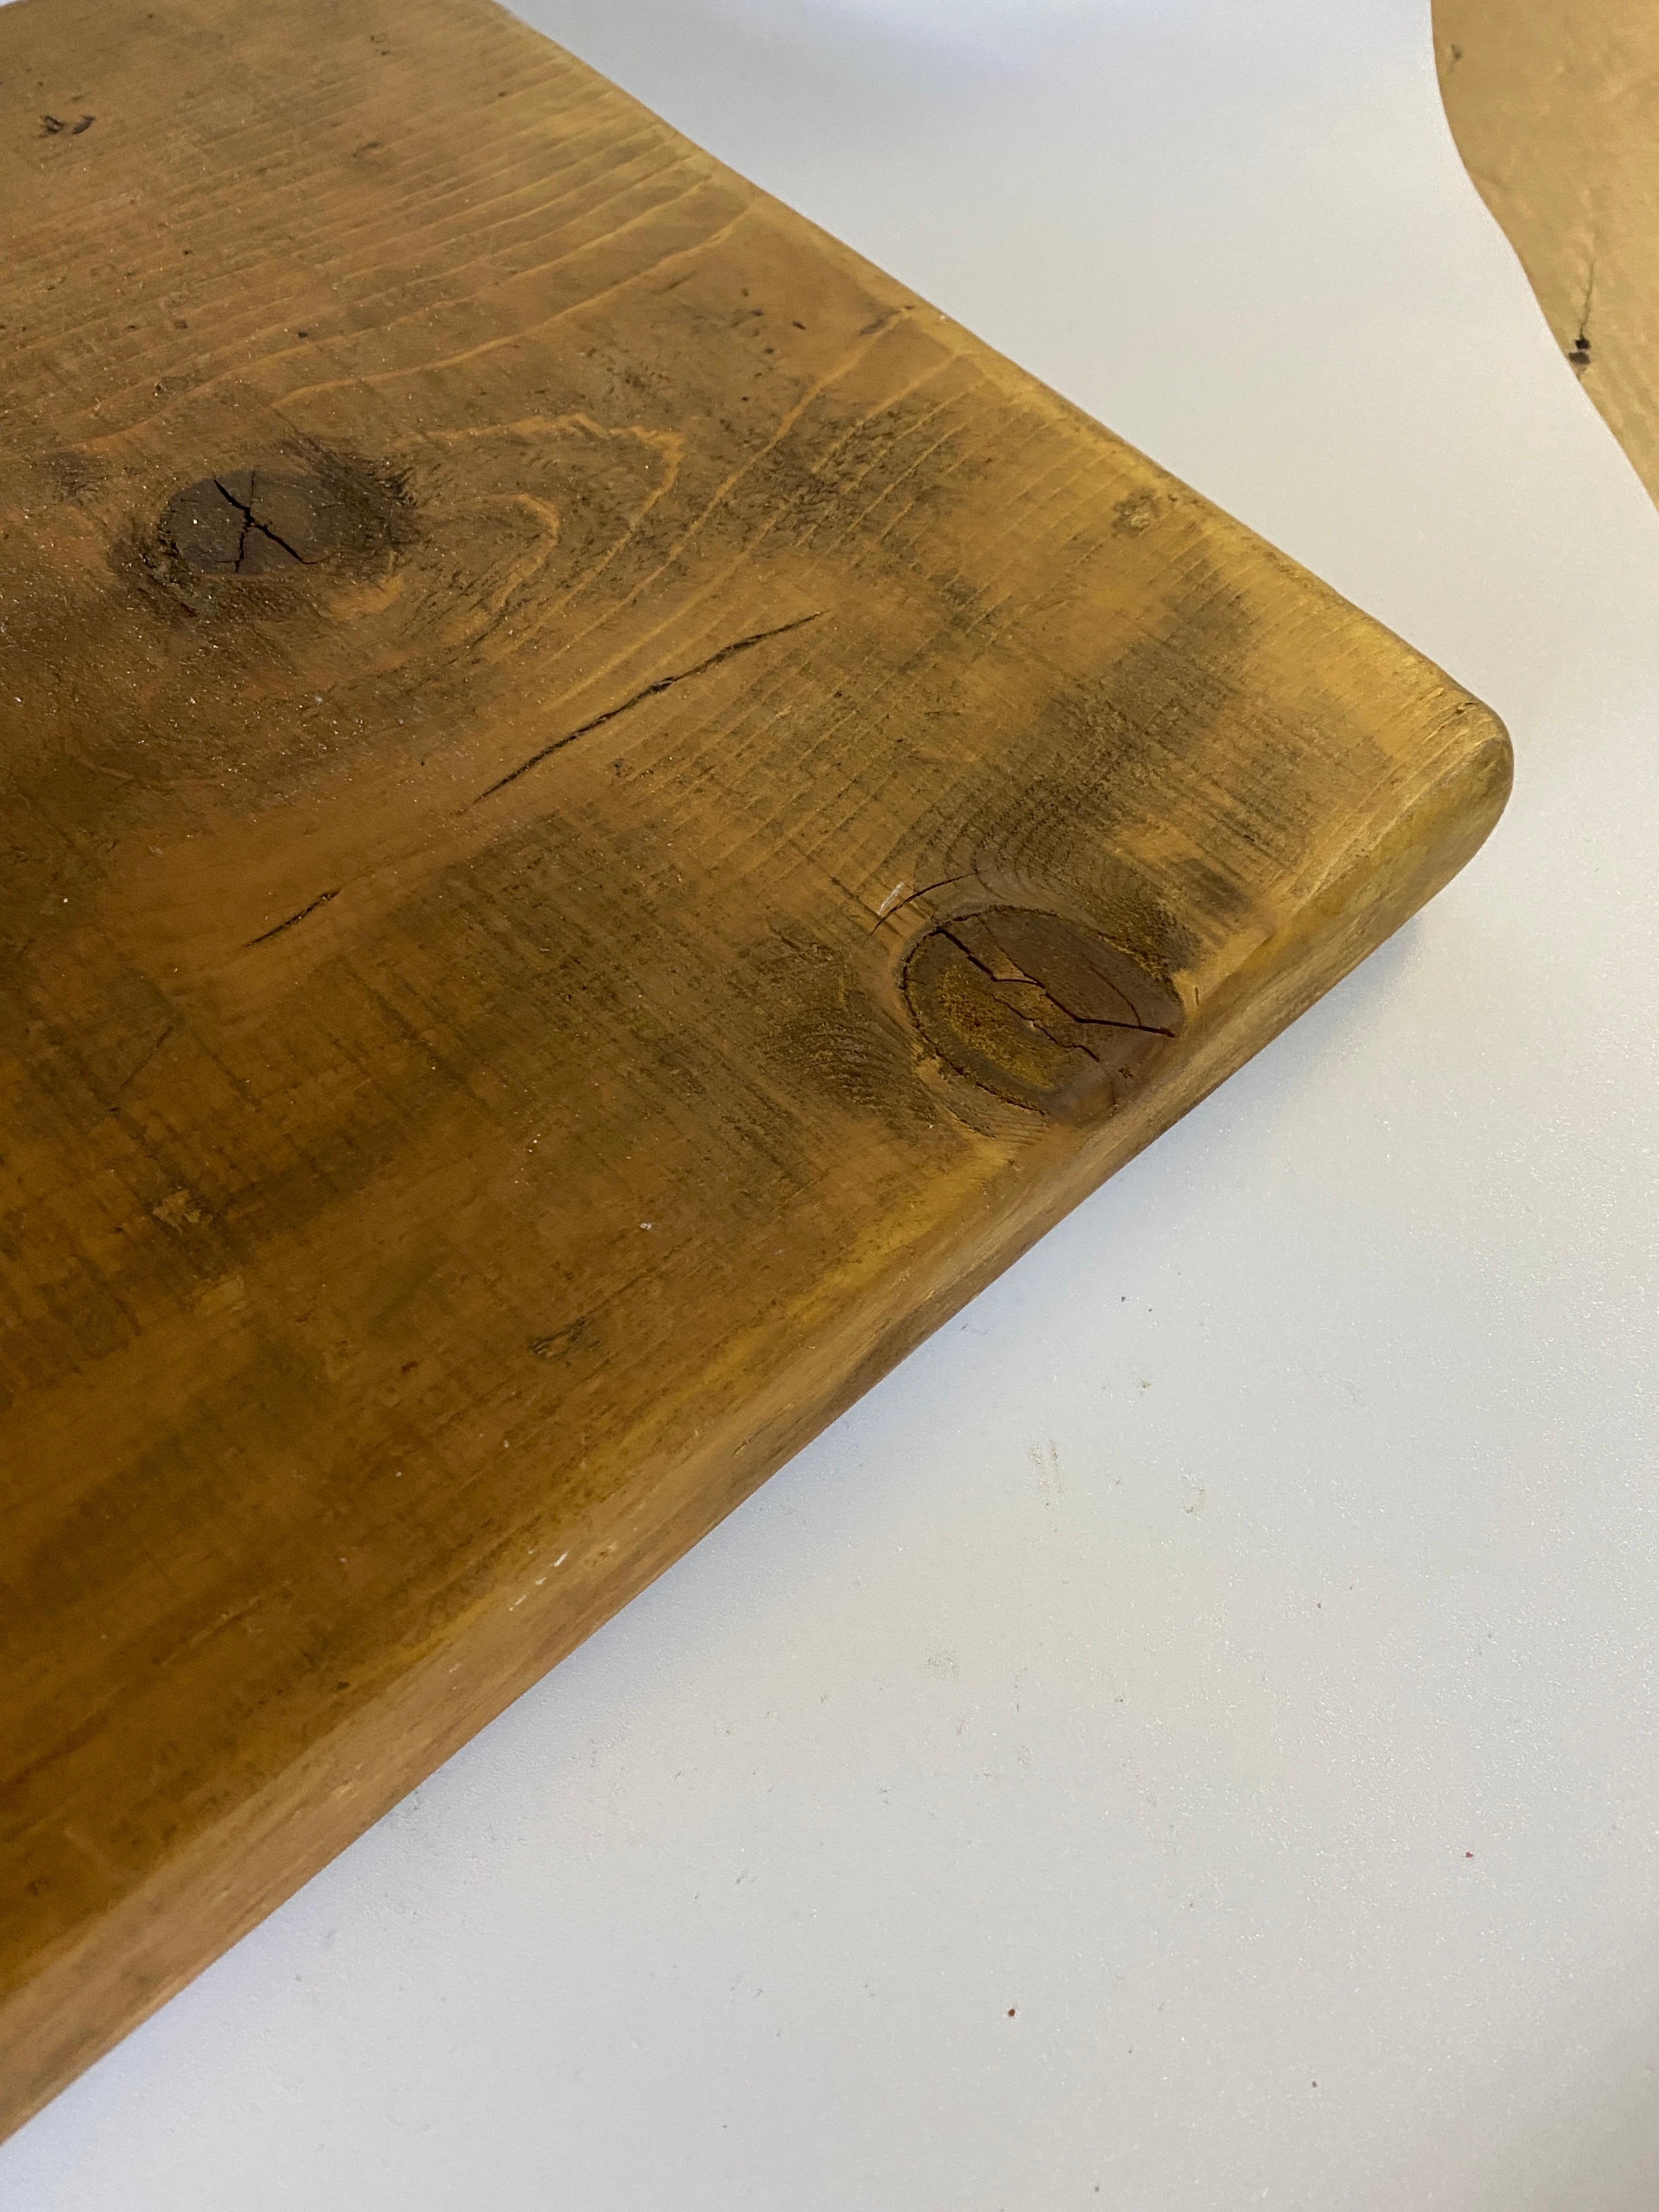 French Provincial Century, Wooden Chopping or Cutting Board, Old Patina, Brown Color, French 19th 